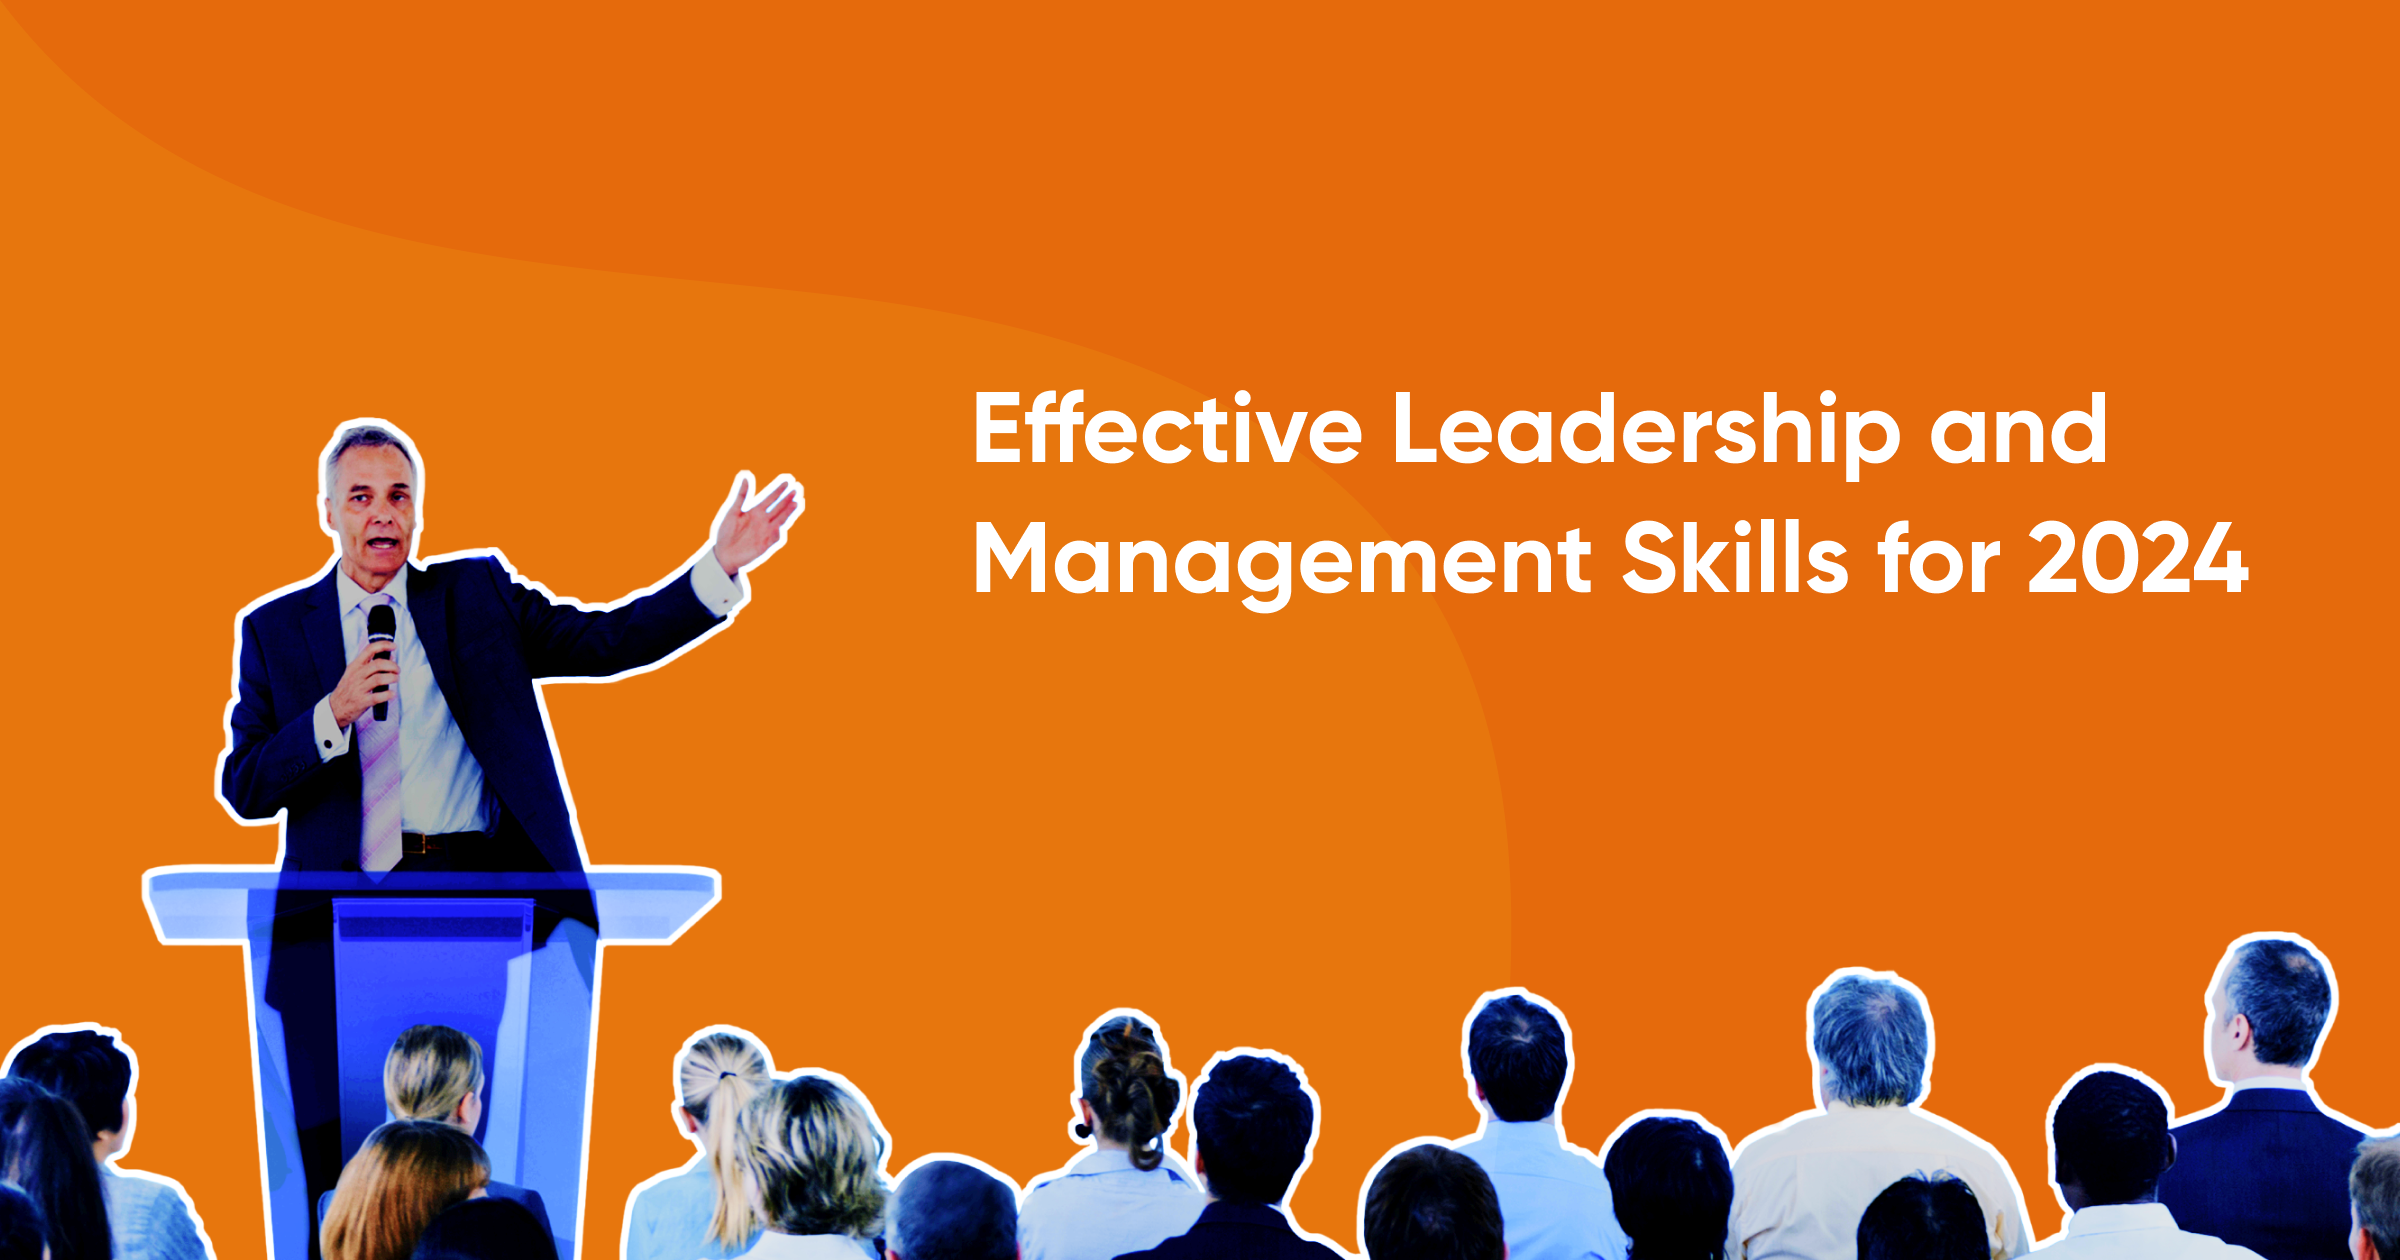 Effective Leadership and Management Skills for 2024